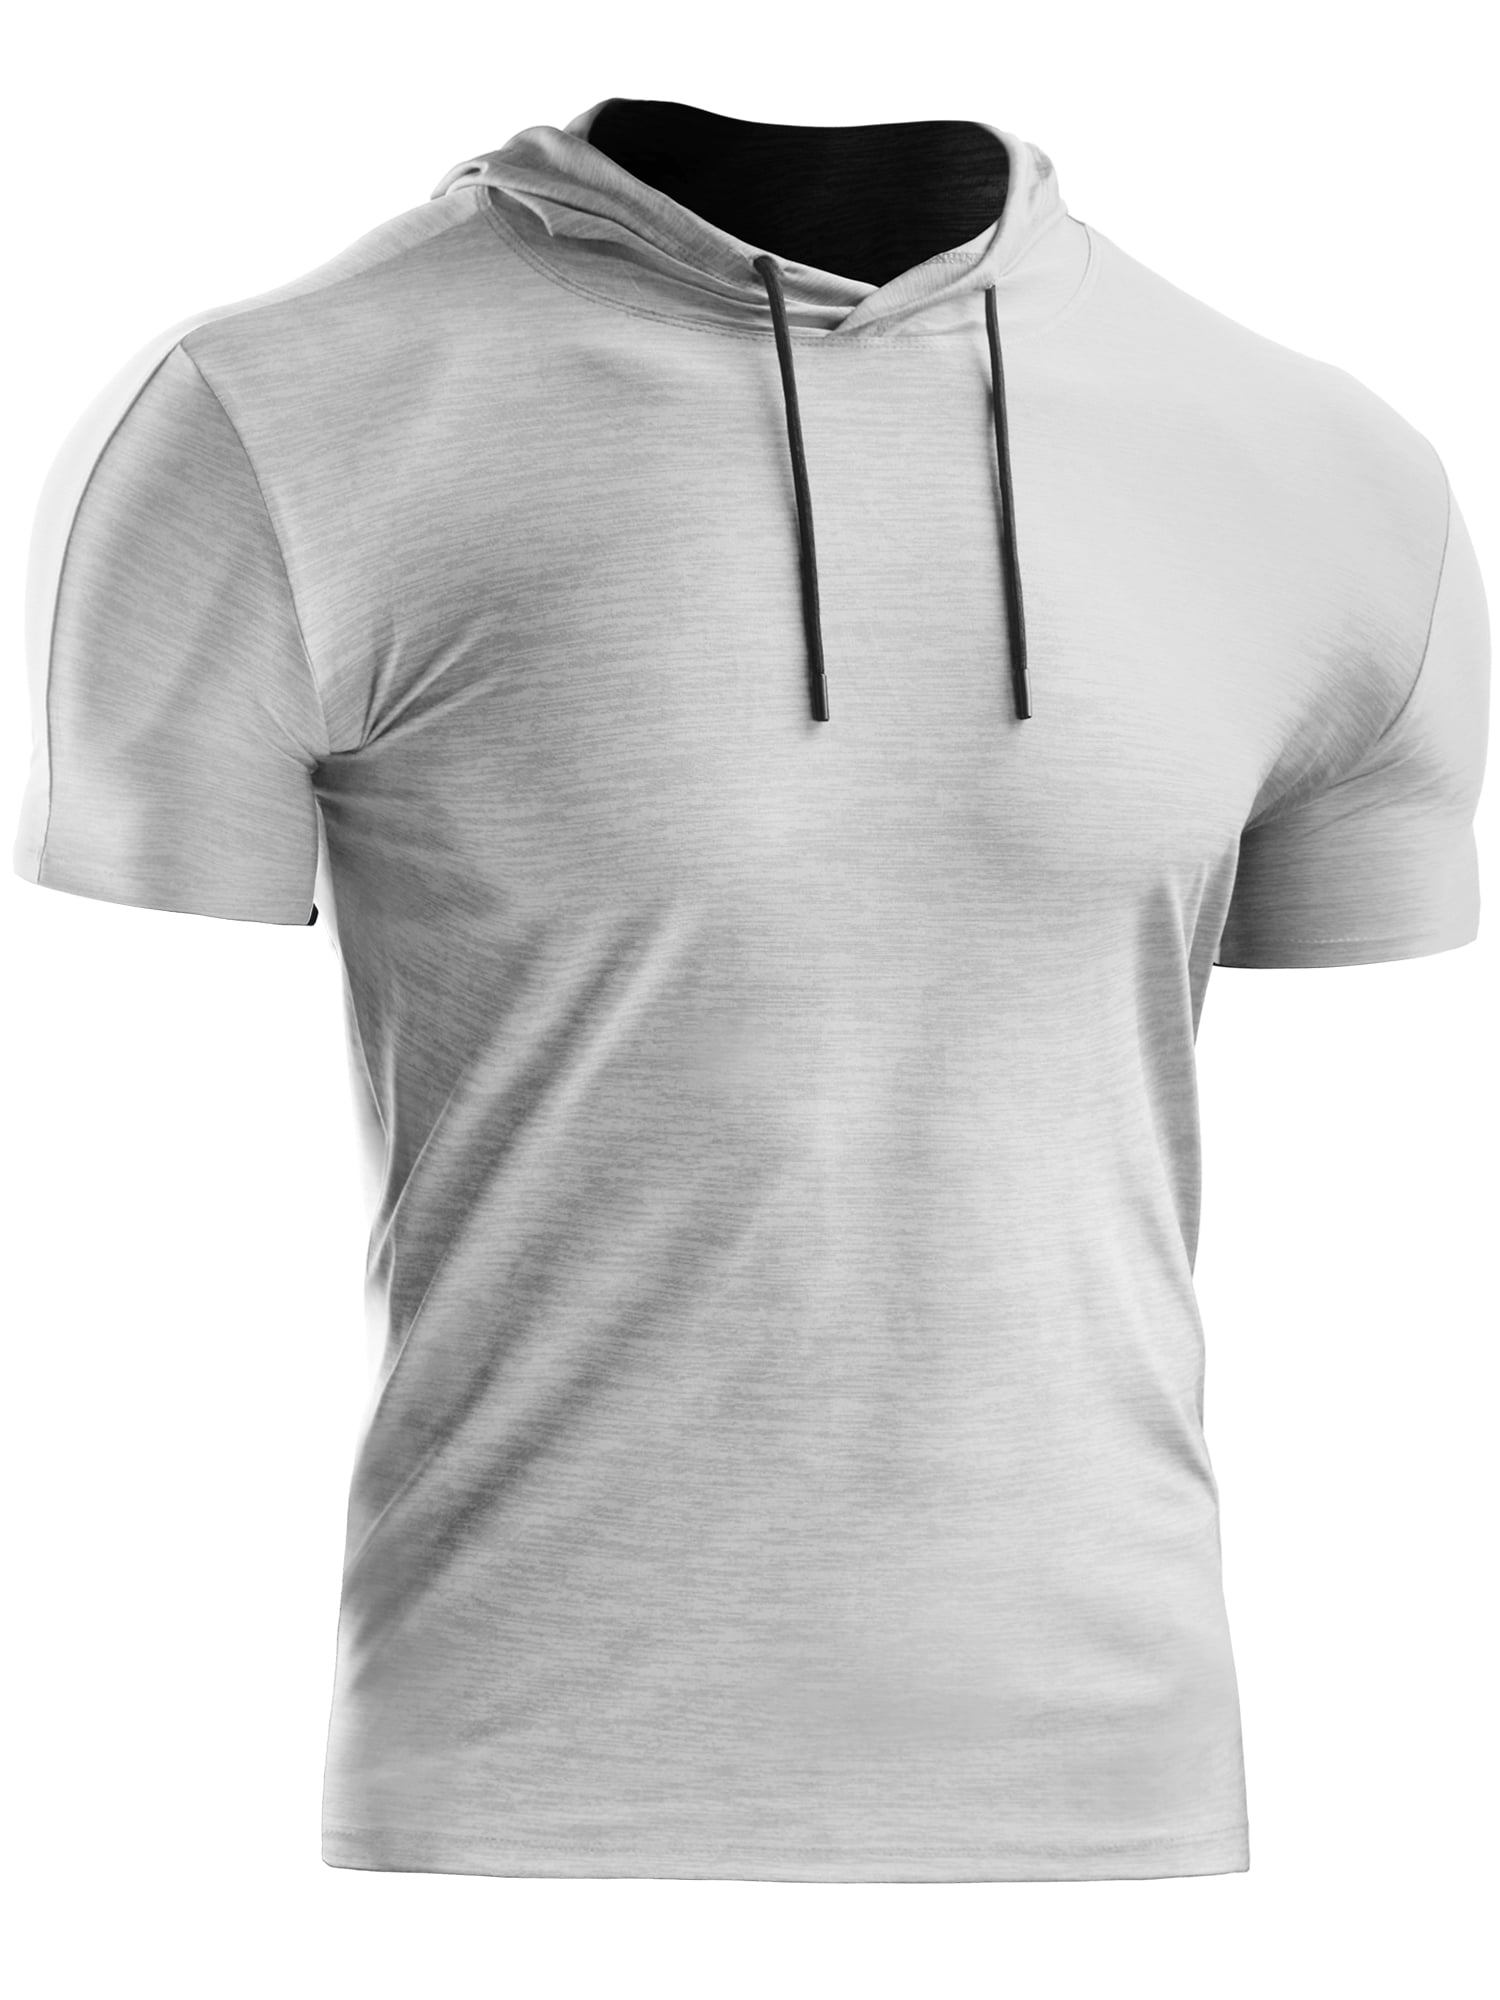 MISYAA T Shirts for Men Muscle White T Shirt Breathable Sport Tank Top Basic Sweatshirt Tee Masculinity Gifts Mens Tops